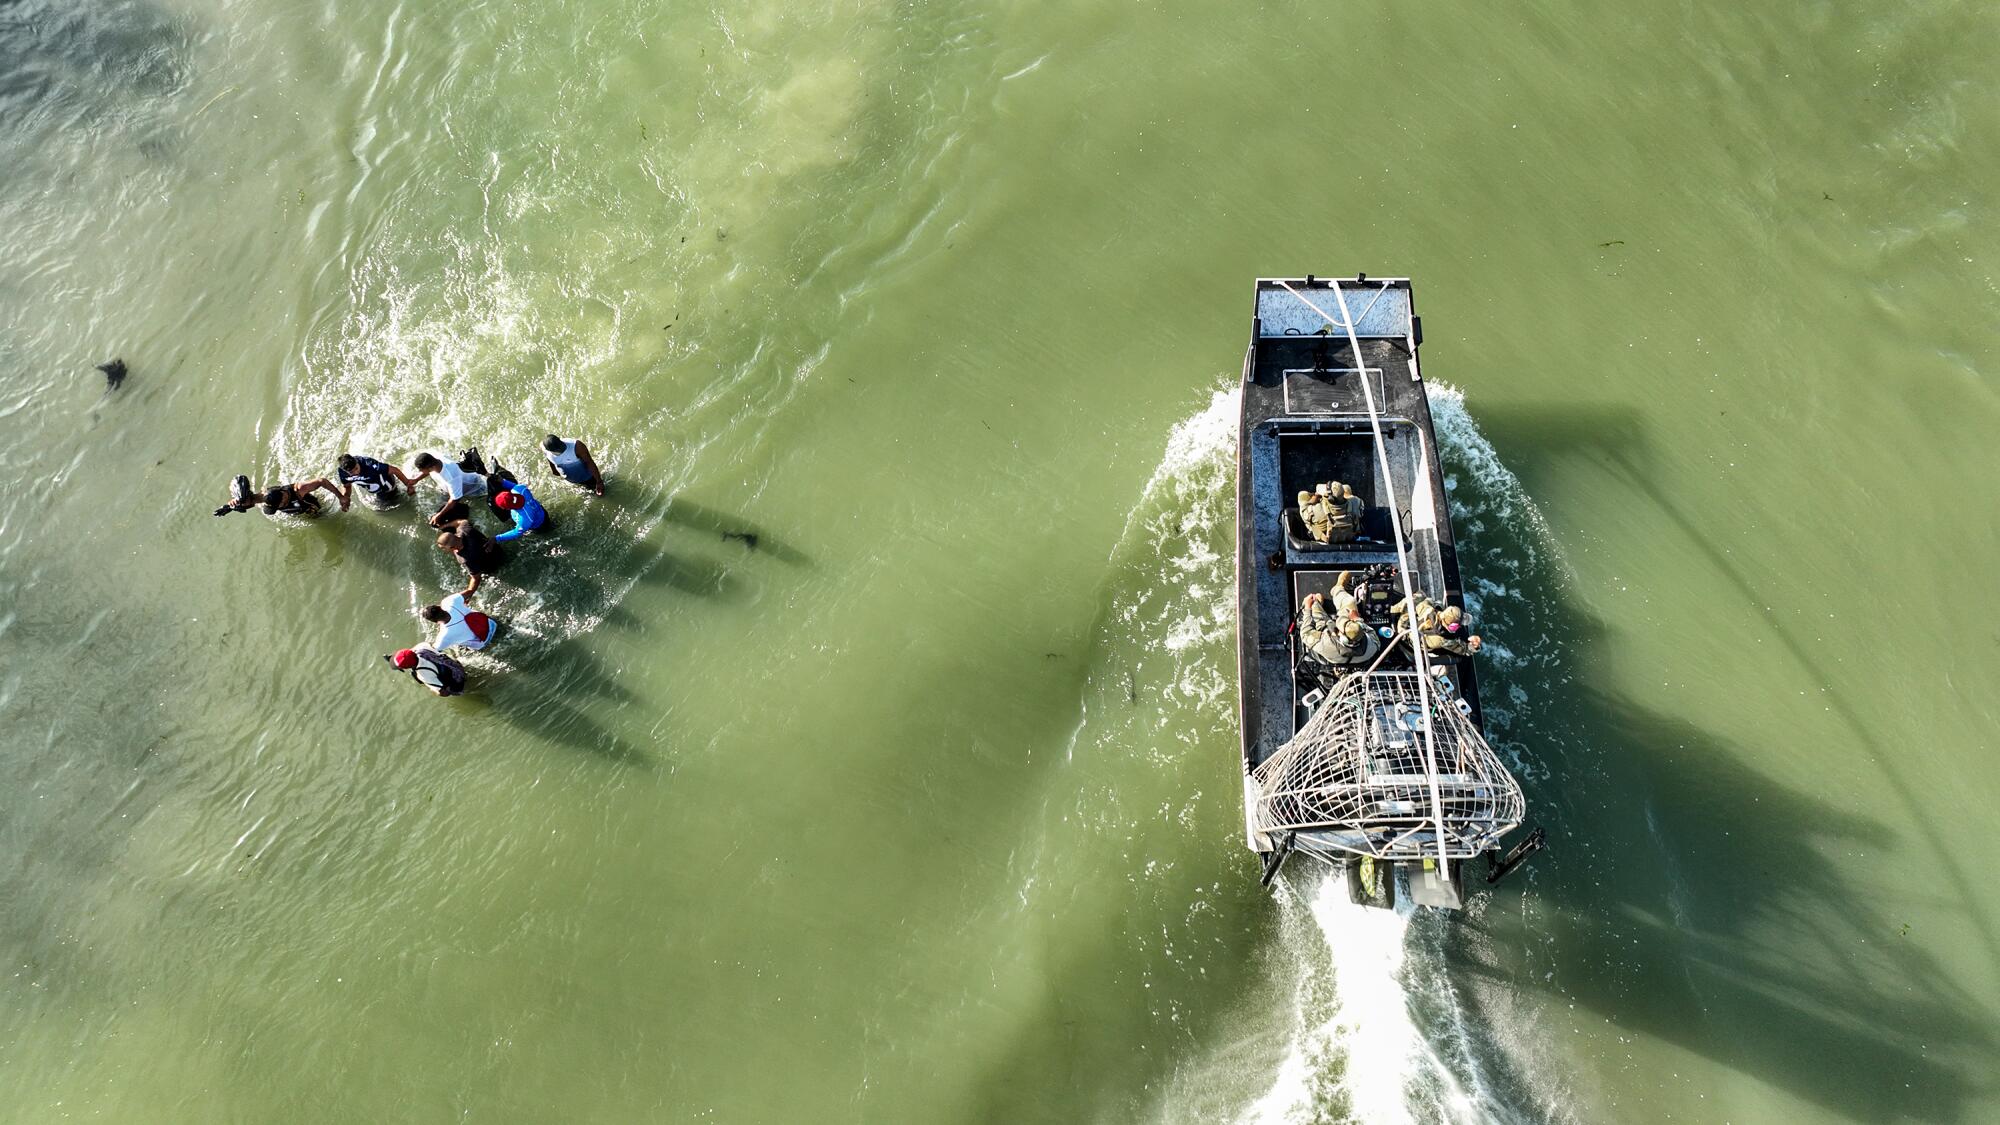 A boat seen from above passes by a group of people wading a river.